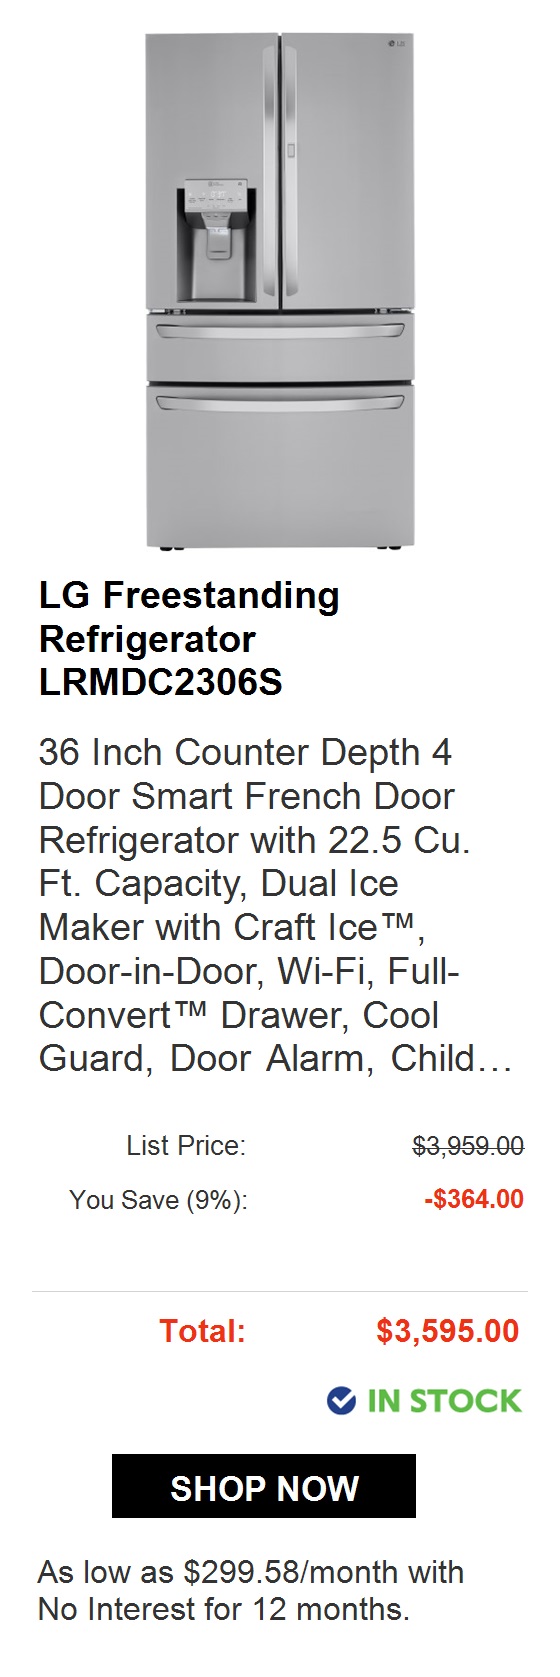  LG 36 Inch Counter Depth French Door Refrigerator LFCC23596S 36 Inch Counter Depth 3- Door French Door Refrigerator with 22.6 Cu. Ft. Capacity, InstaView Door-in-Door, LoDecibel Quiet Operation, Sabbath Mode, and EnergyStar Certified List Price: $3,189.00 You Save 9%: -$290.00 Total: $2,899.00 @ IN STOCK As low as $241.58month with No Interest for 12 months. 